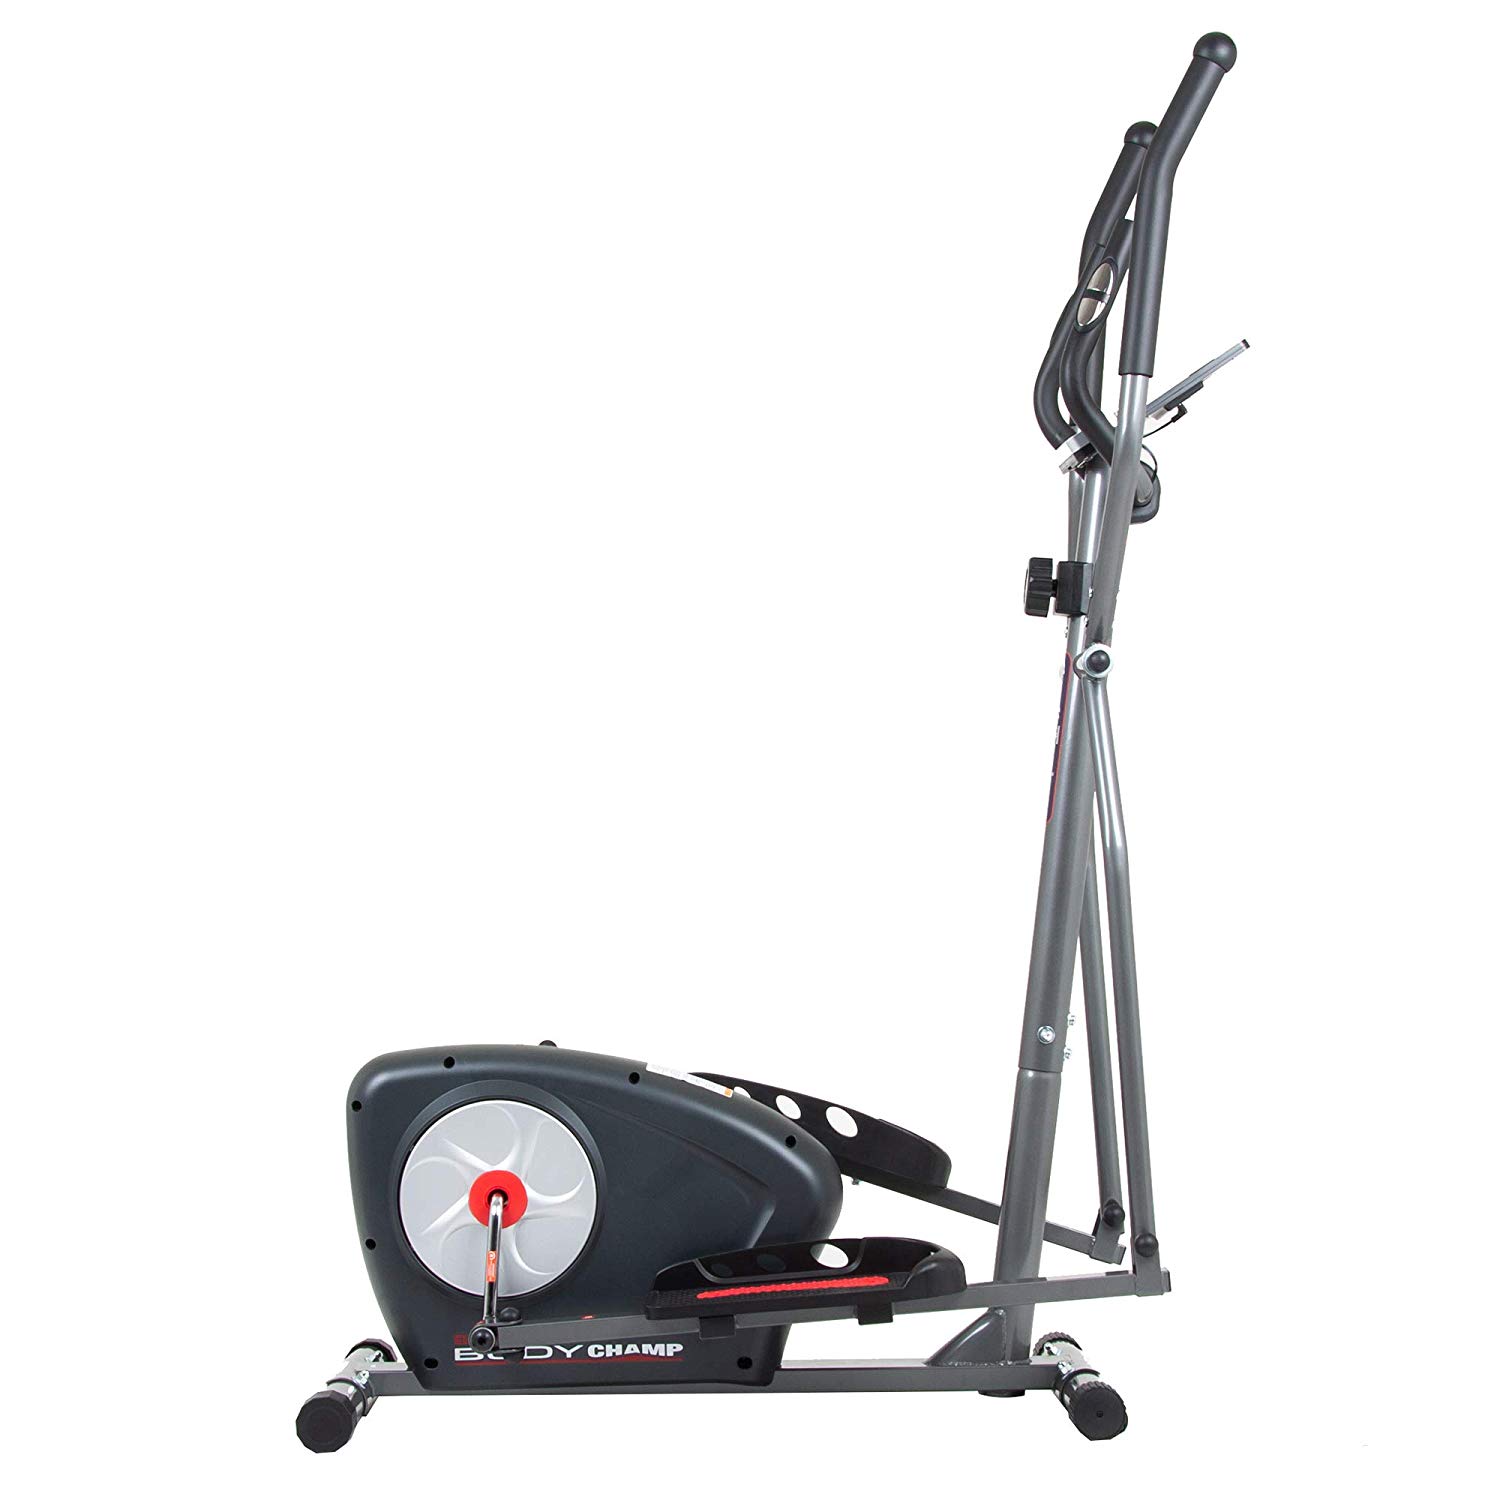 Body Champ Magnetic Adjustable Elliptical Machine Trainer with LCD Monitor - image 4 of 7